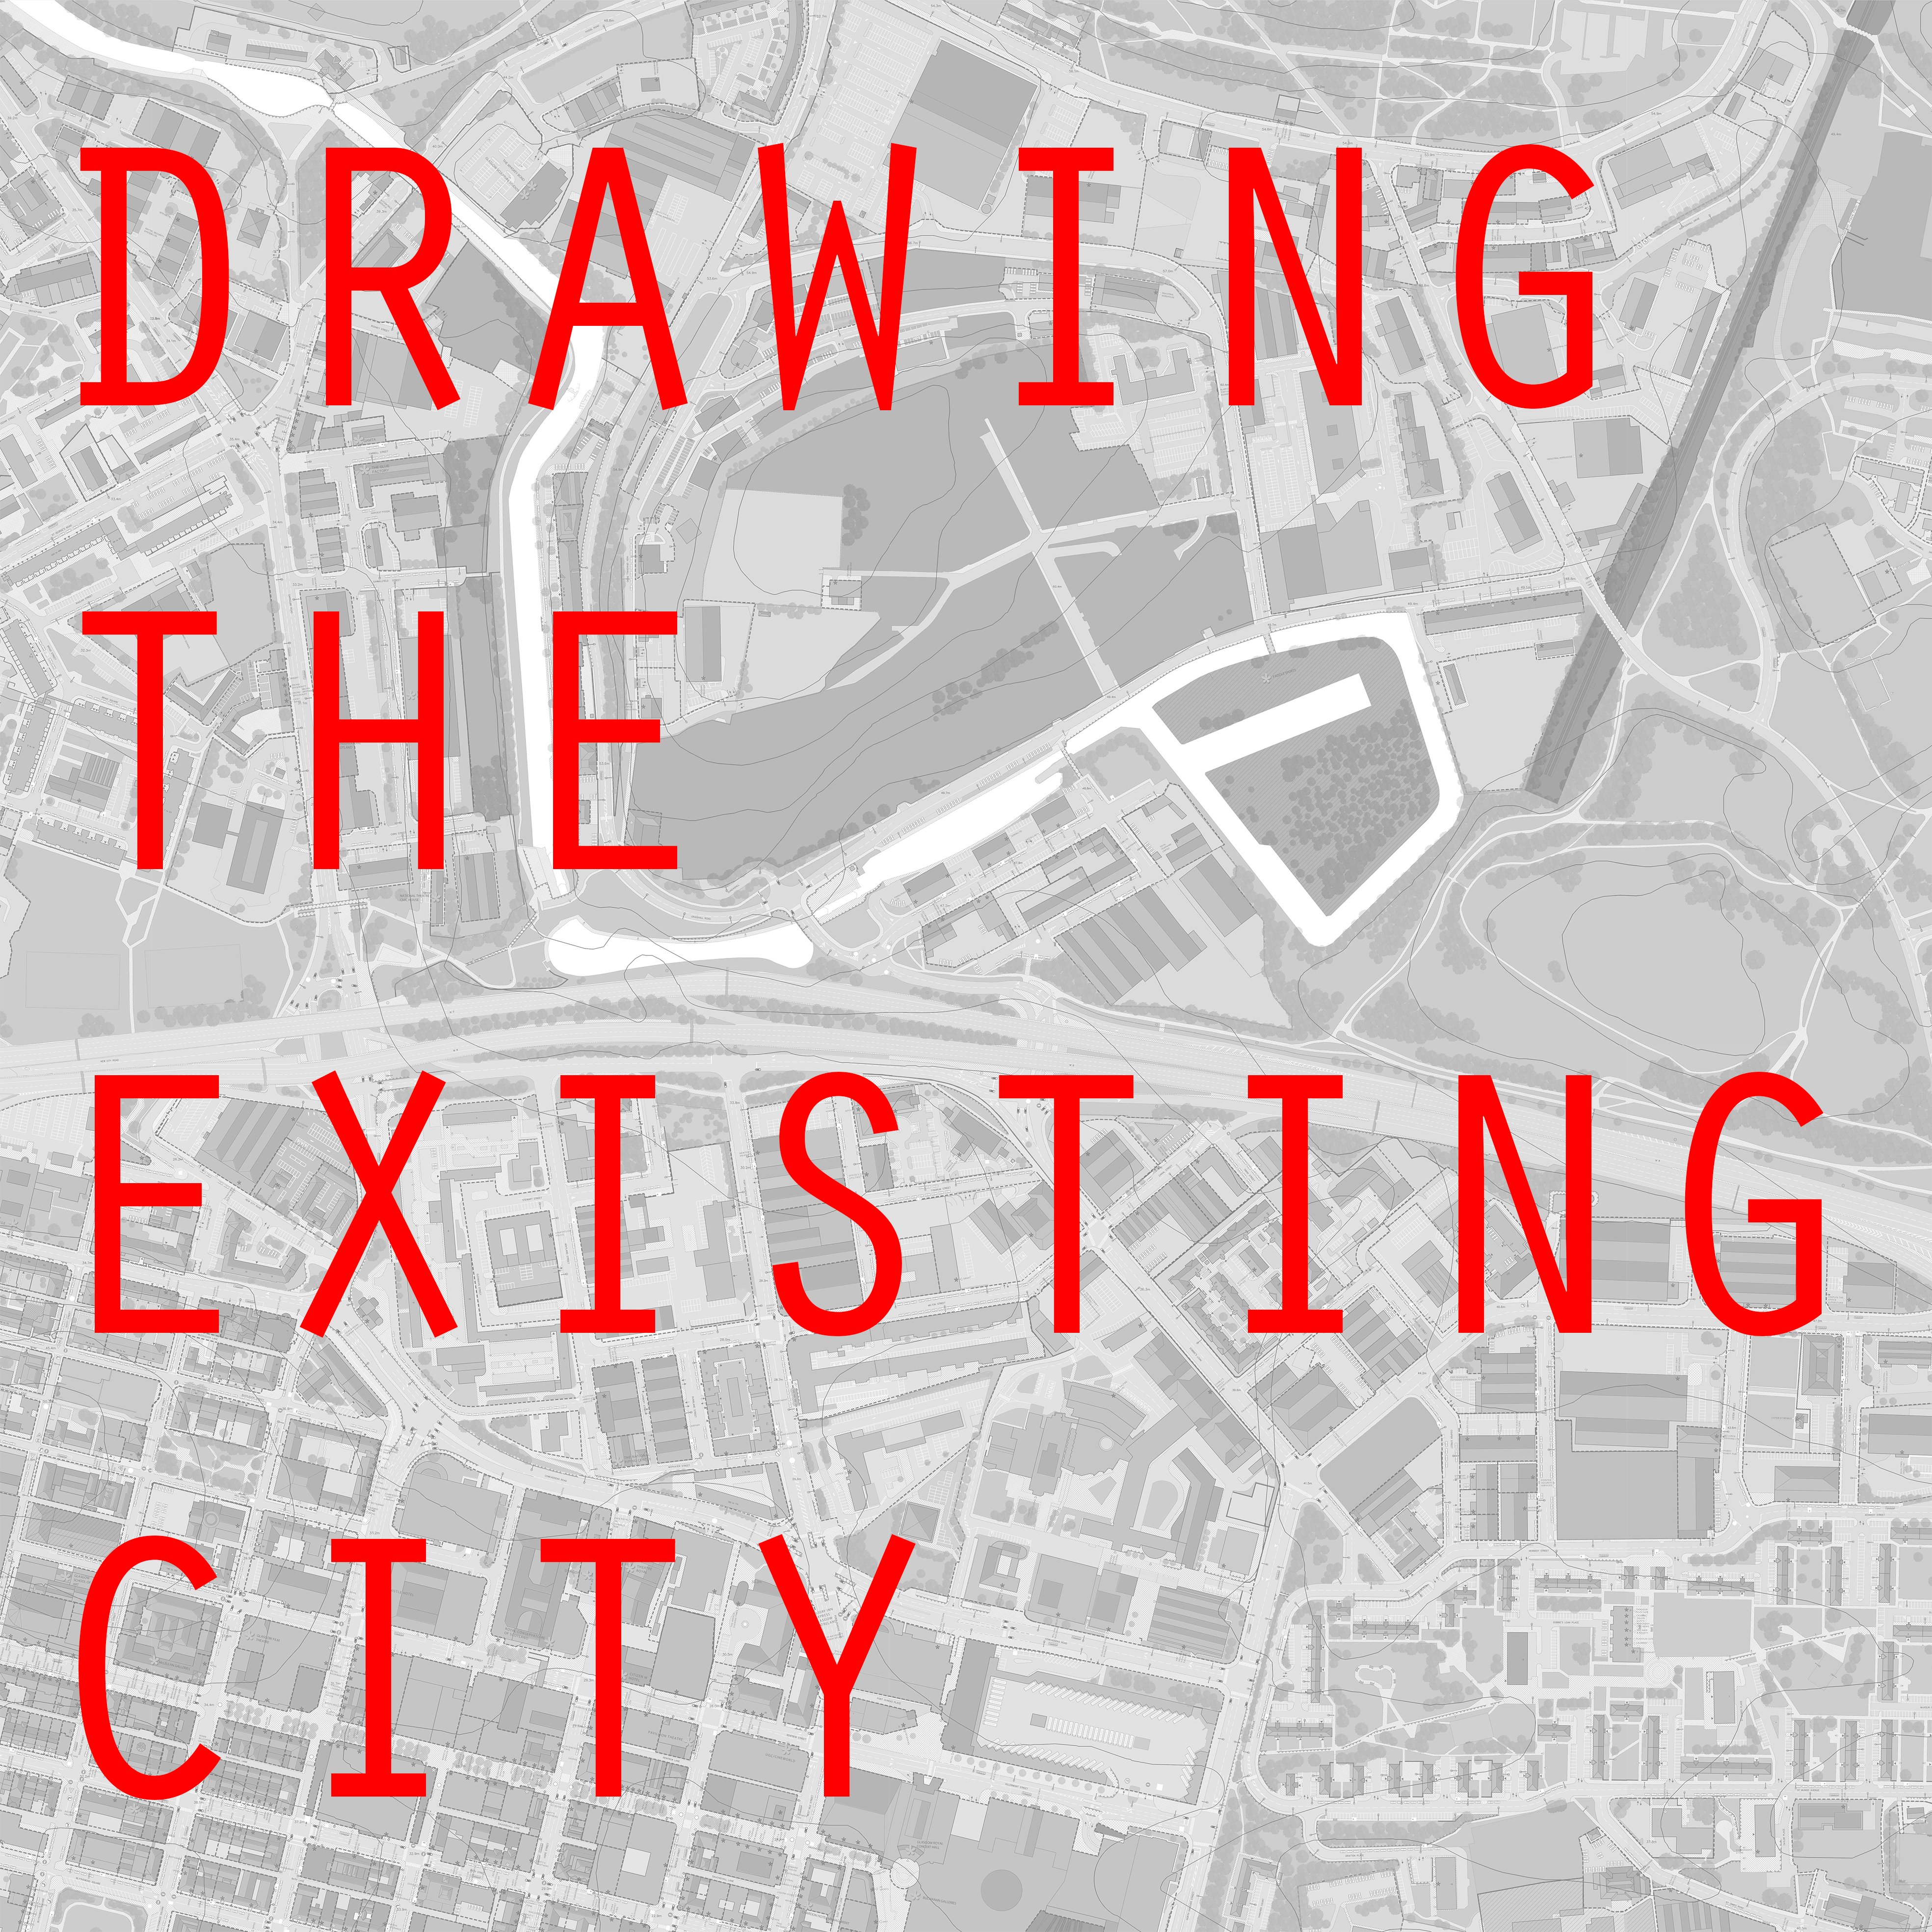 Drawing the Existing City